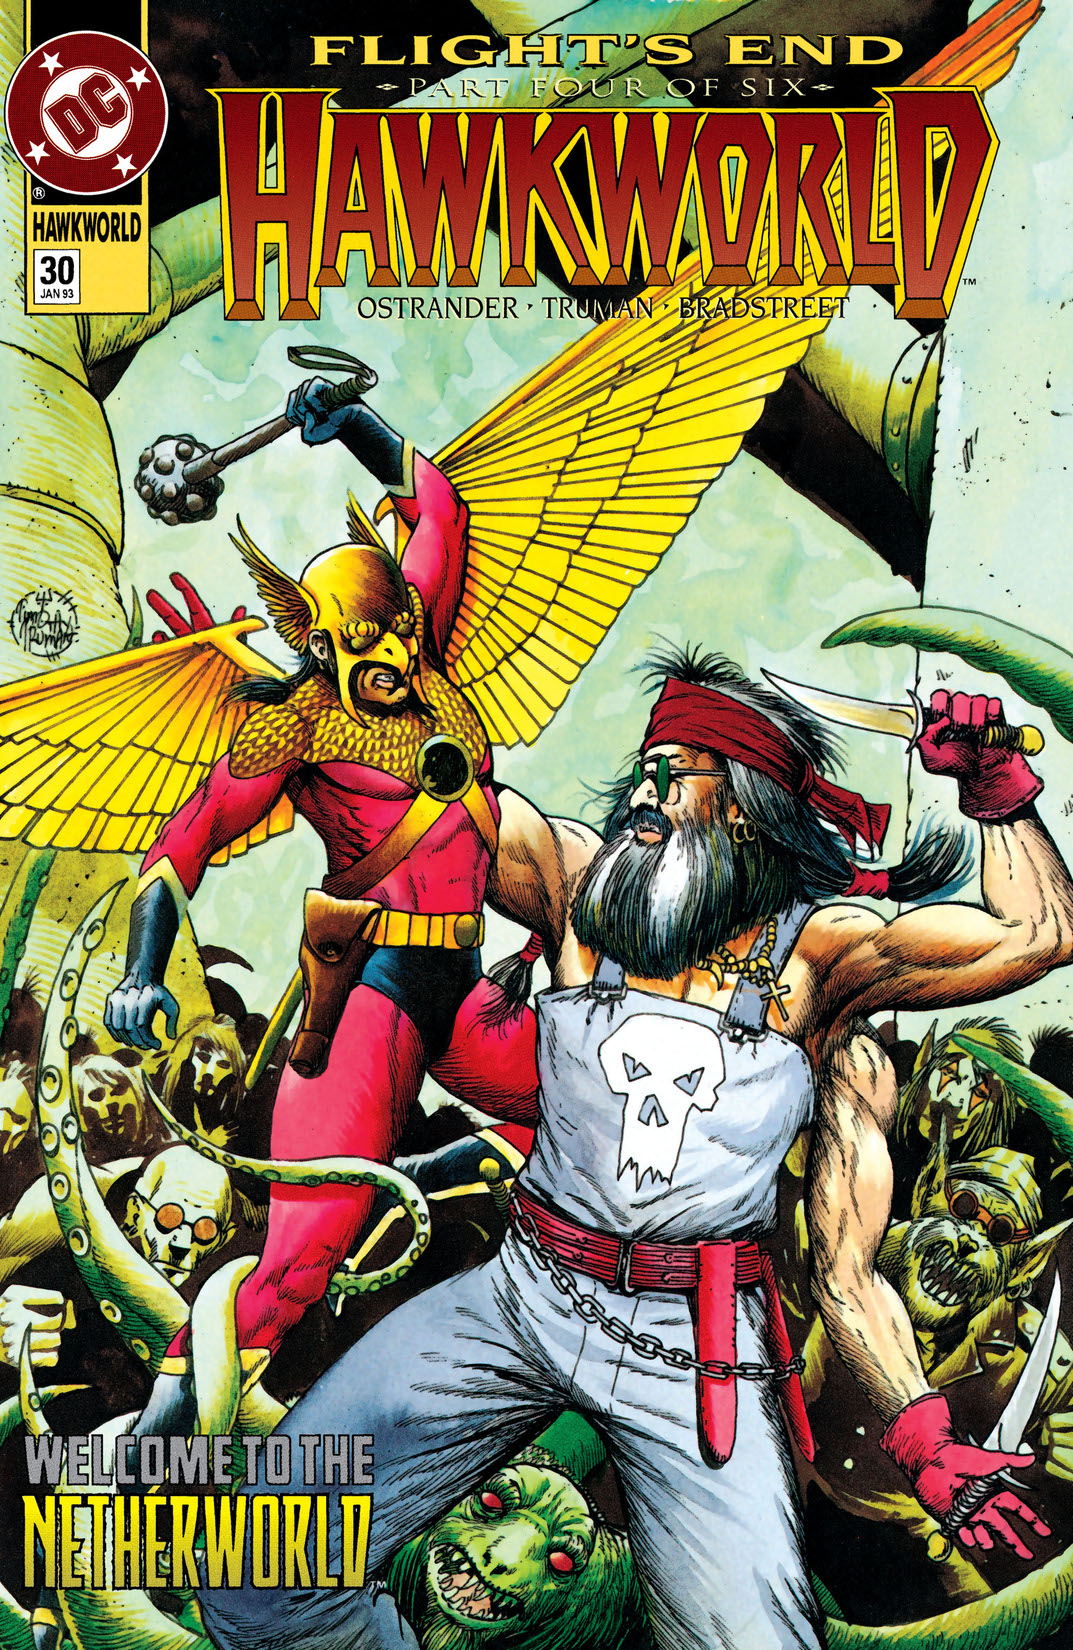 Hawkworld (1989-) #30 preview images